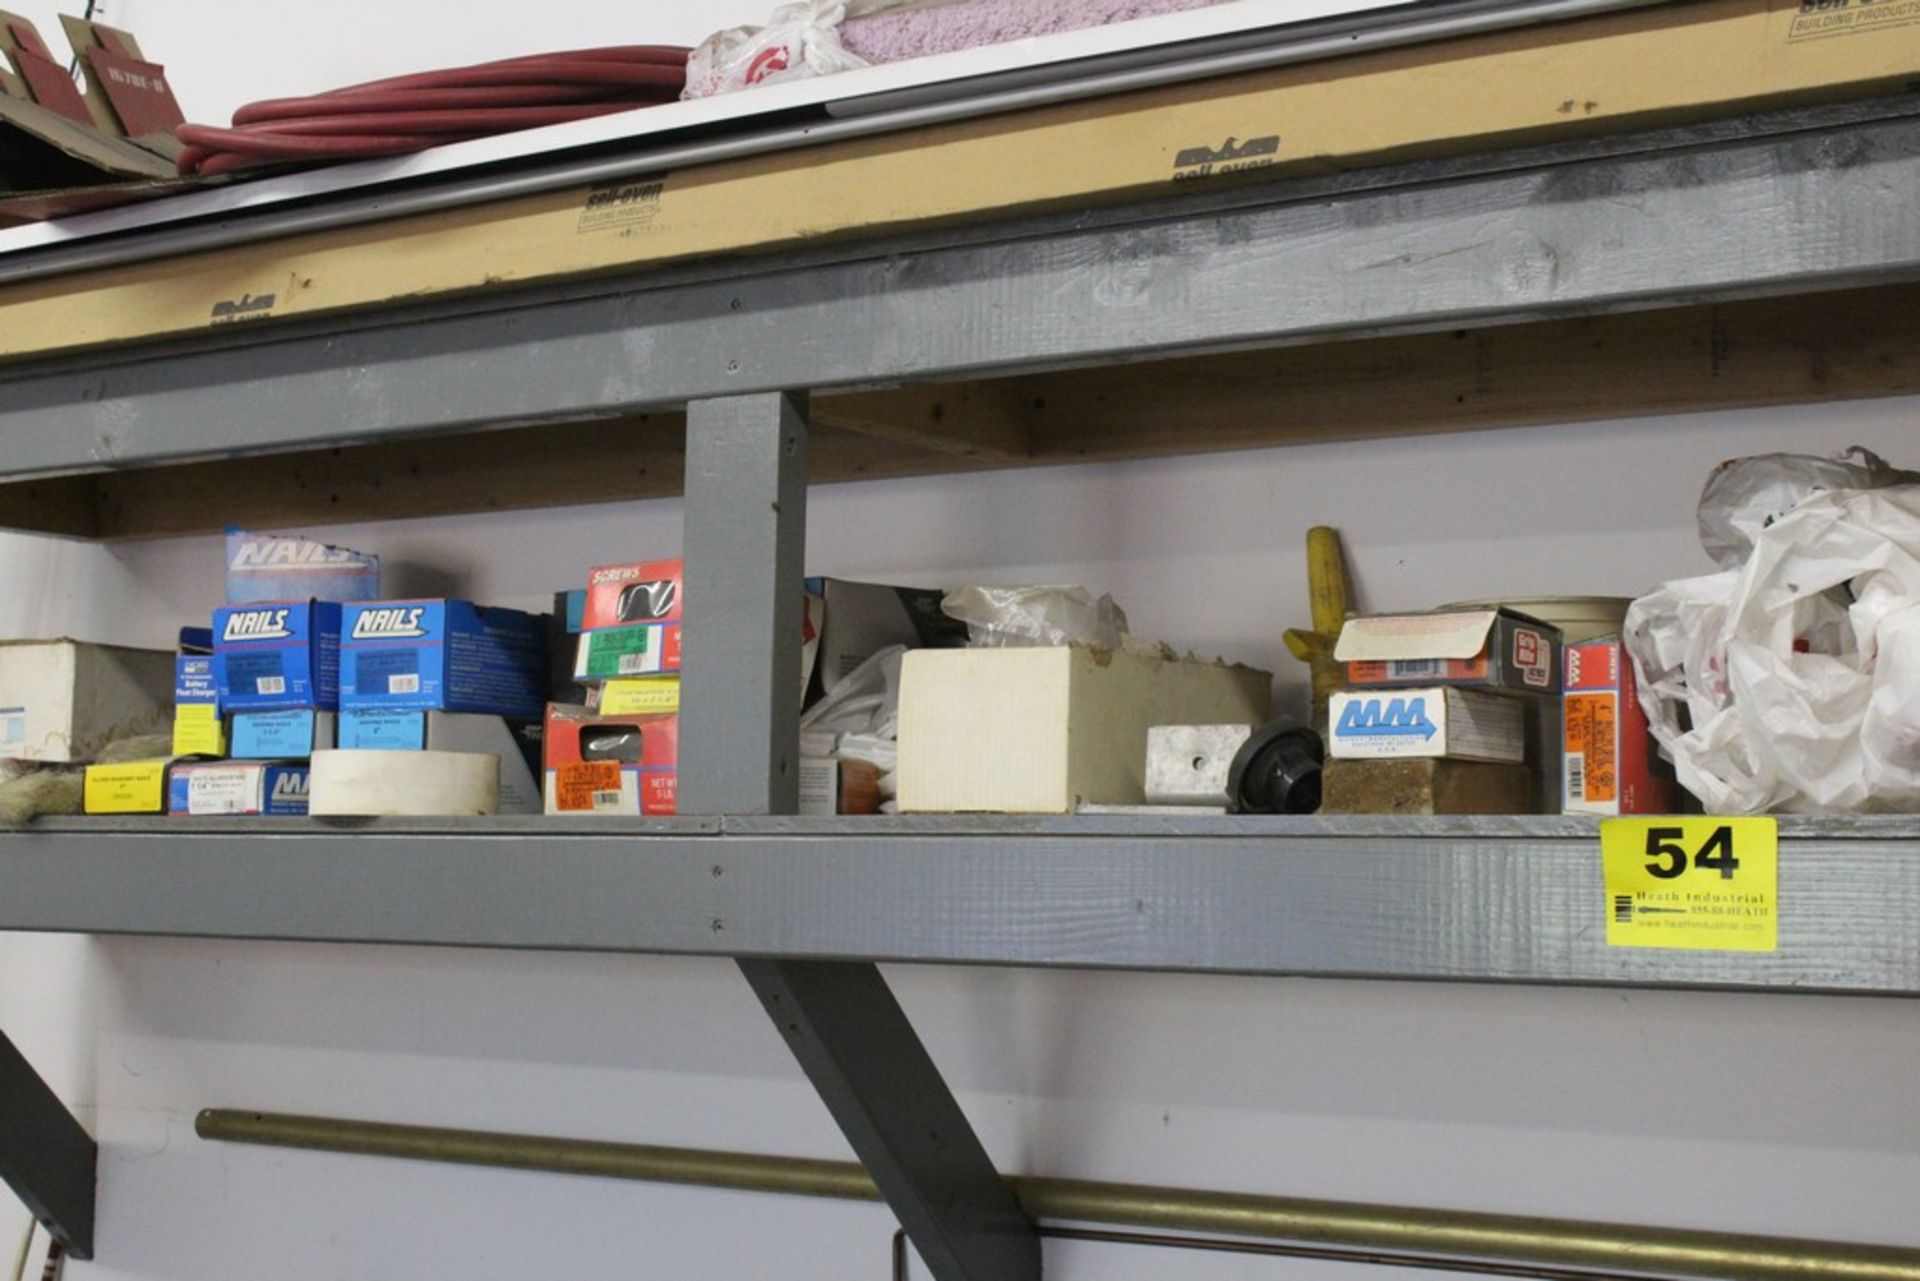 ASSORTED HARDWARE AND MISC. ON LOWER SHELF